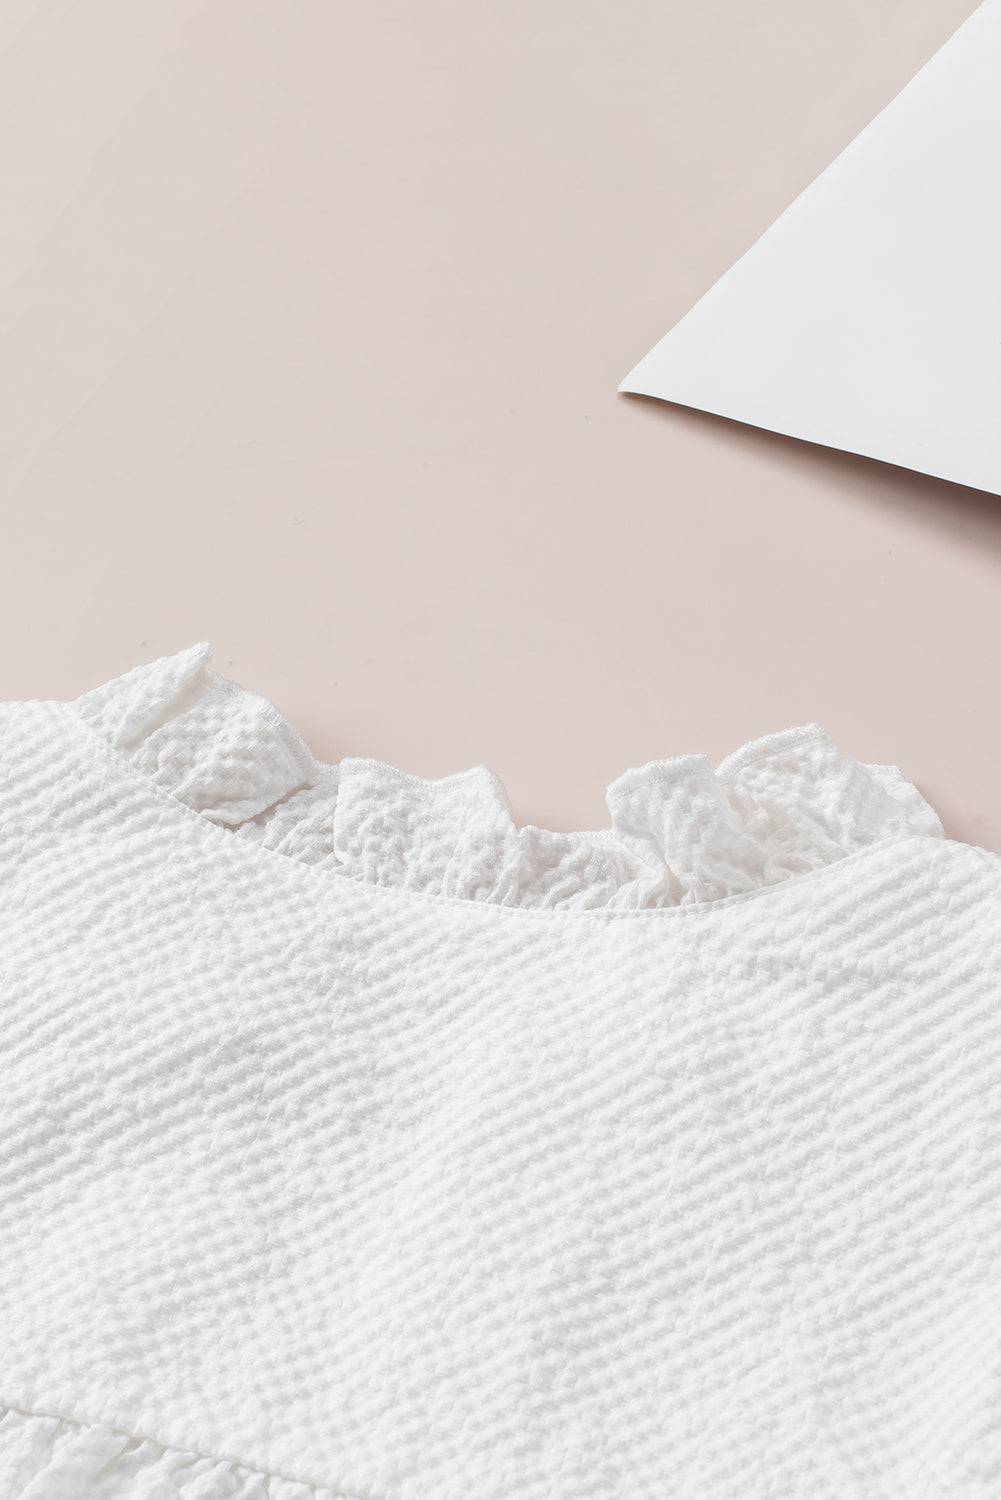 a close up of a white dress on a table